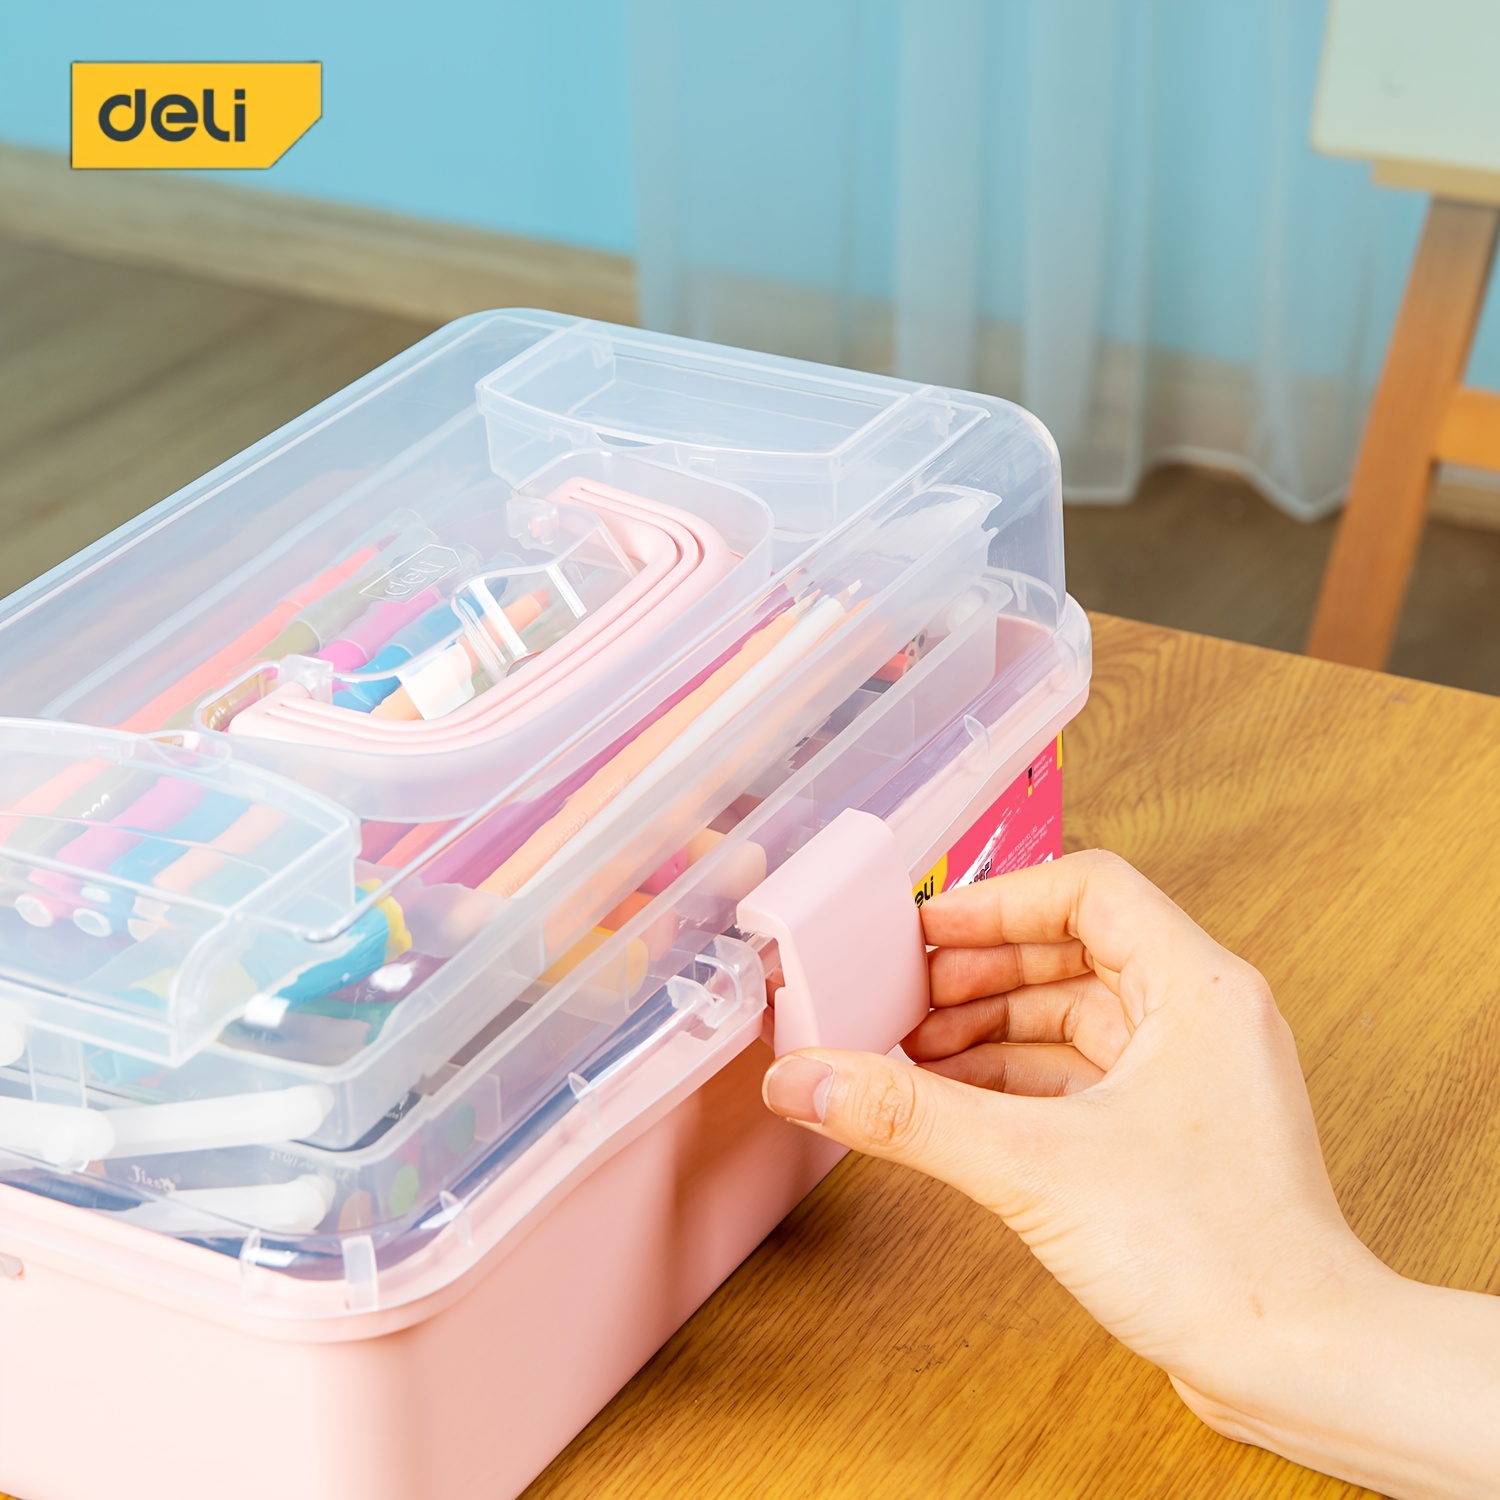 Deli Plastic Tool Box 13 Inches Pink Art Craft Organizer Storage Box With 3  Layers Multifunctional Plastic Tool Box With Handle For Sewing Makeup Medi